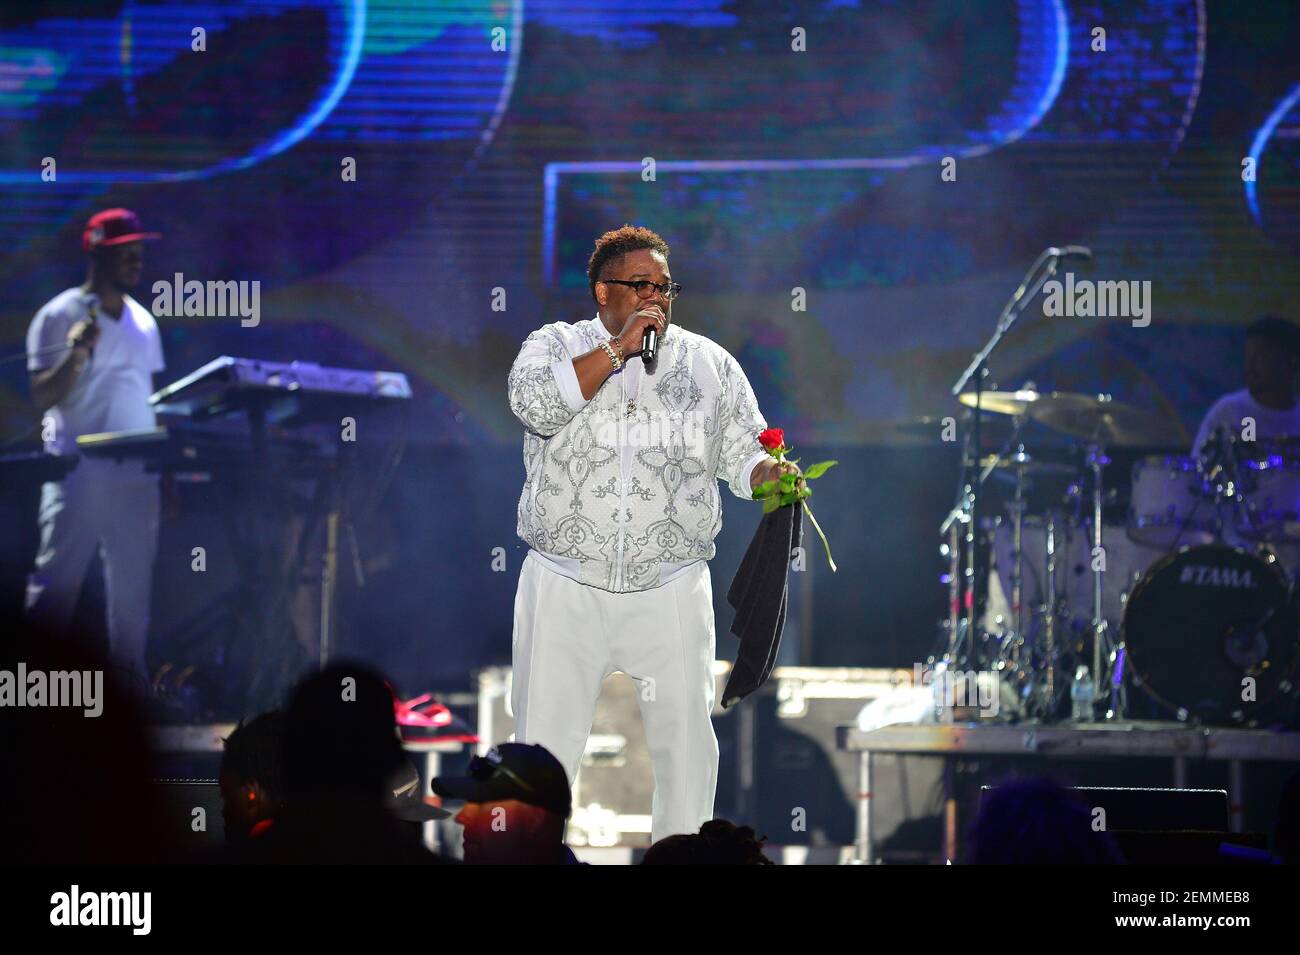 Dave Hollister, of Blackstreet performs during the 14th Annual Jazz in the Gardens Music Festival Day 1 at Hard Rock Stadium on March 9, 2019 in Miami Gardens, Florida Stock Photo